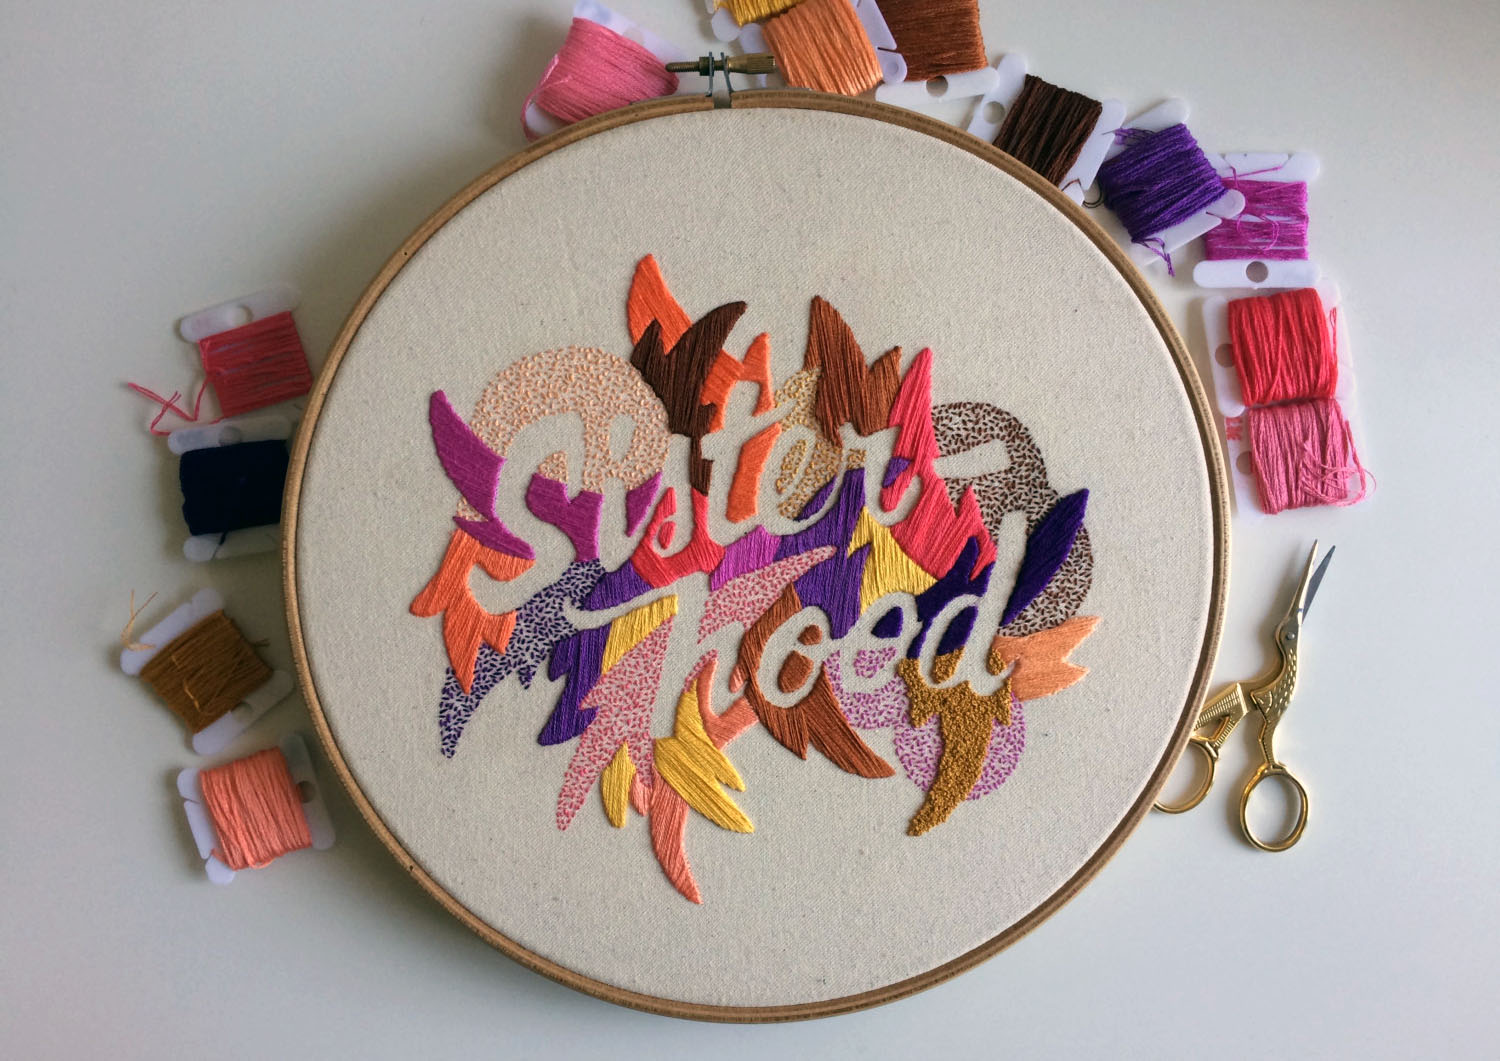 Embroidered typography by Valeria Molinari 